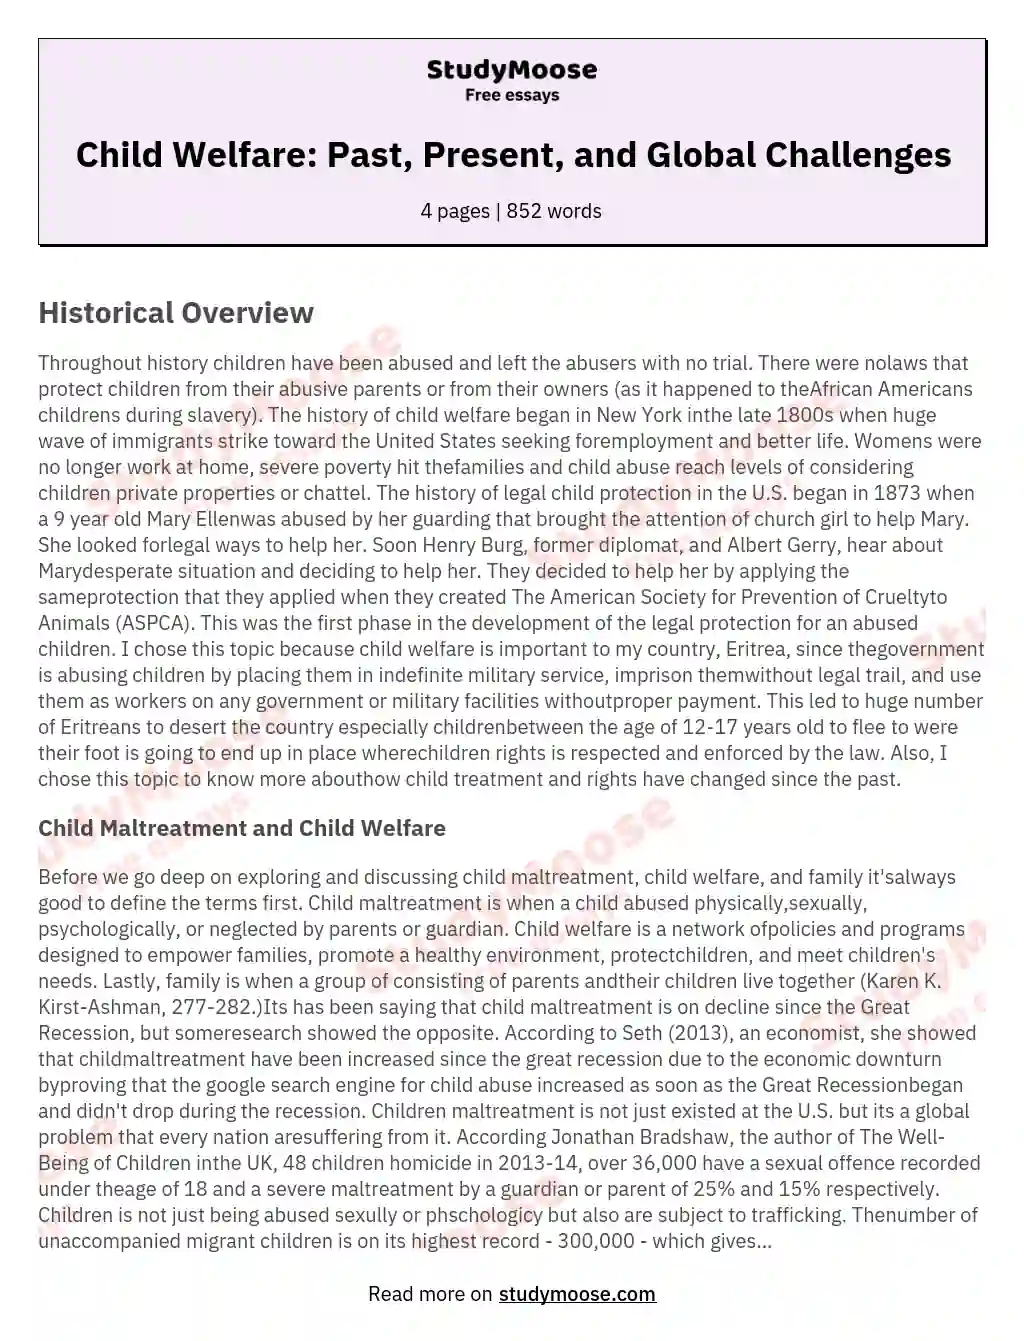 Child Welfare: Past, Present, and Global Challenges essay